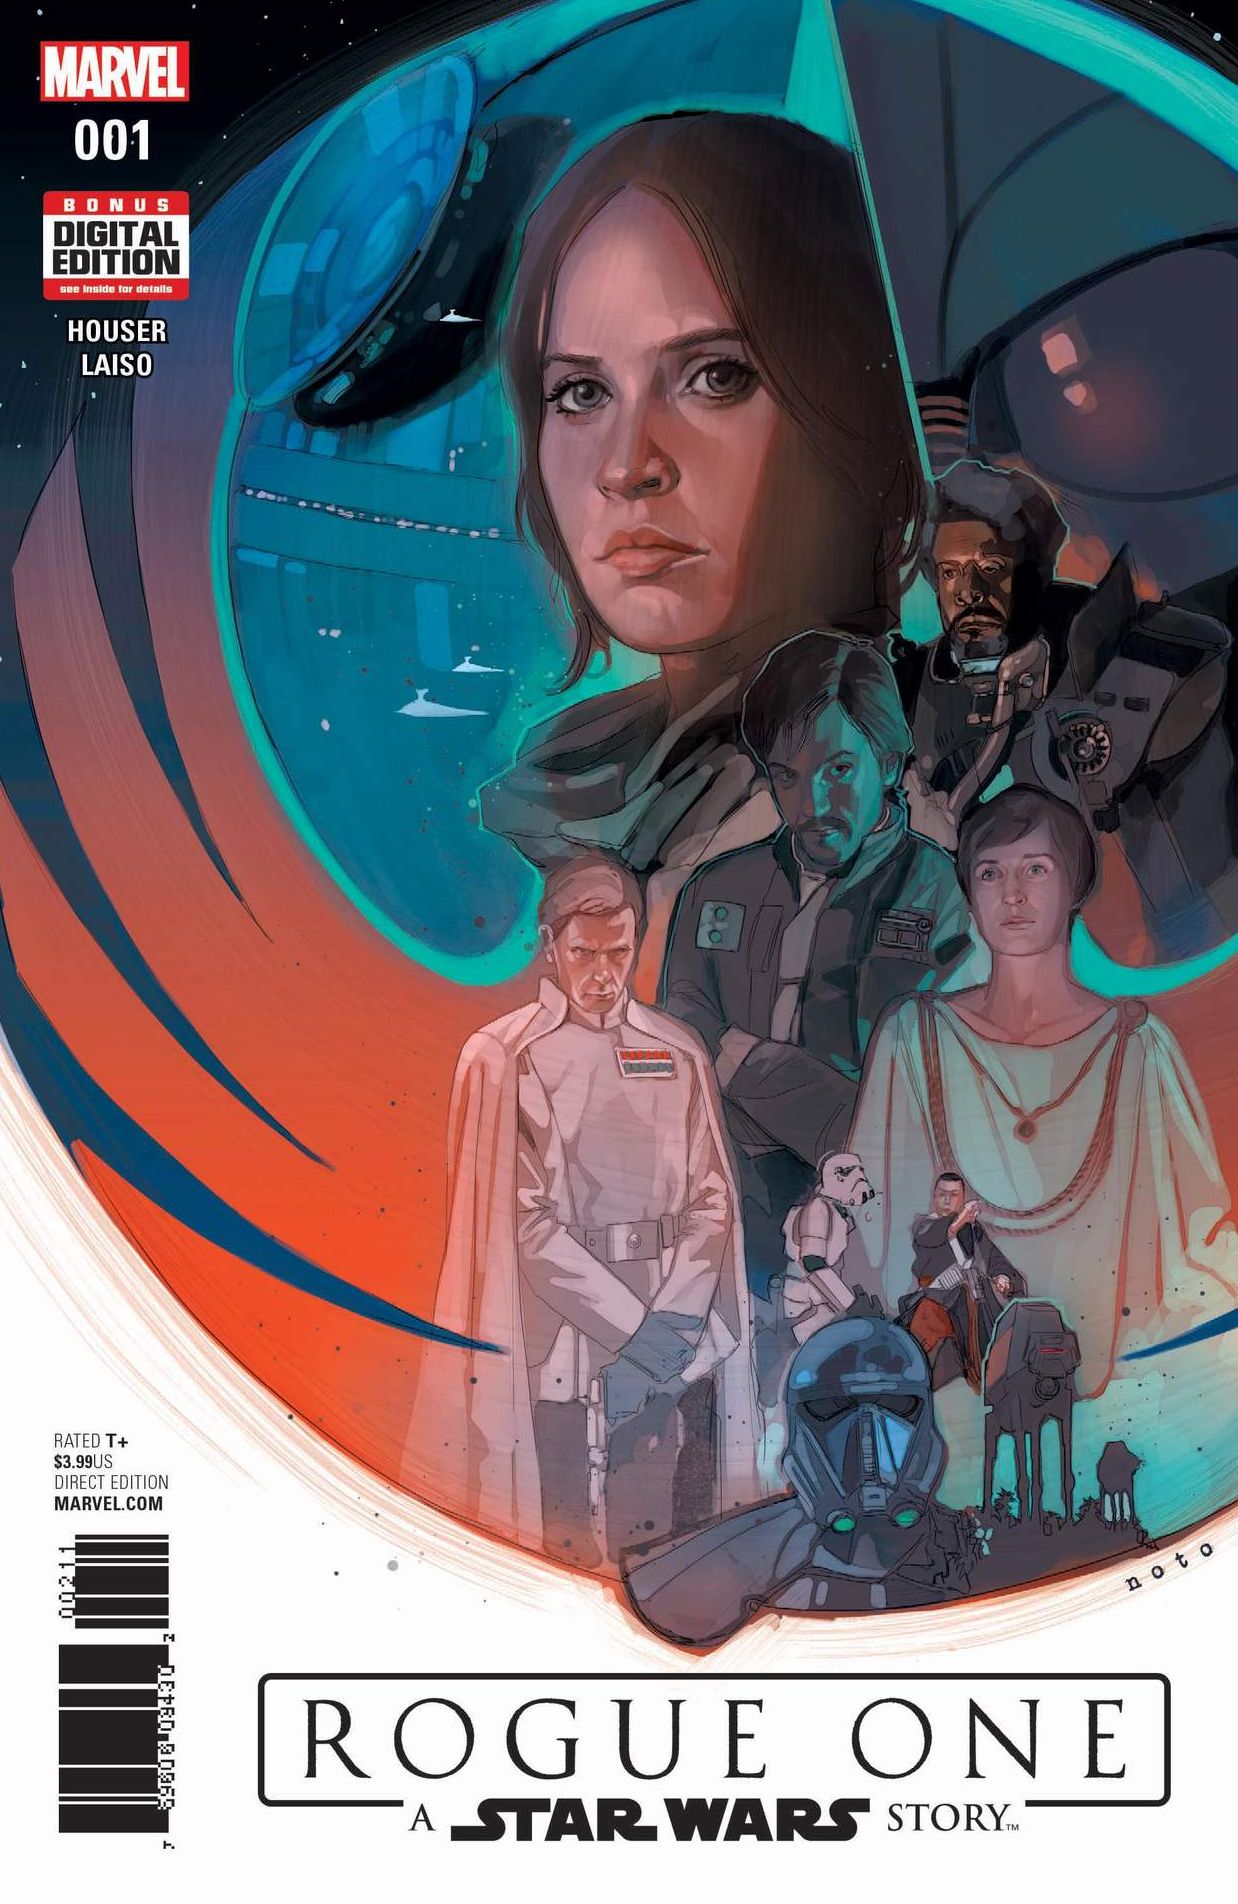 Artwork for issue one of the Rogue One comic book adaptation